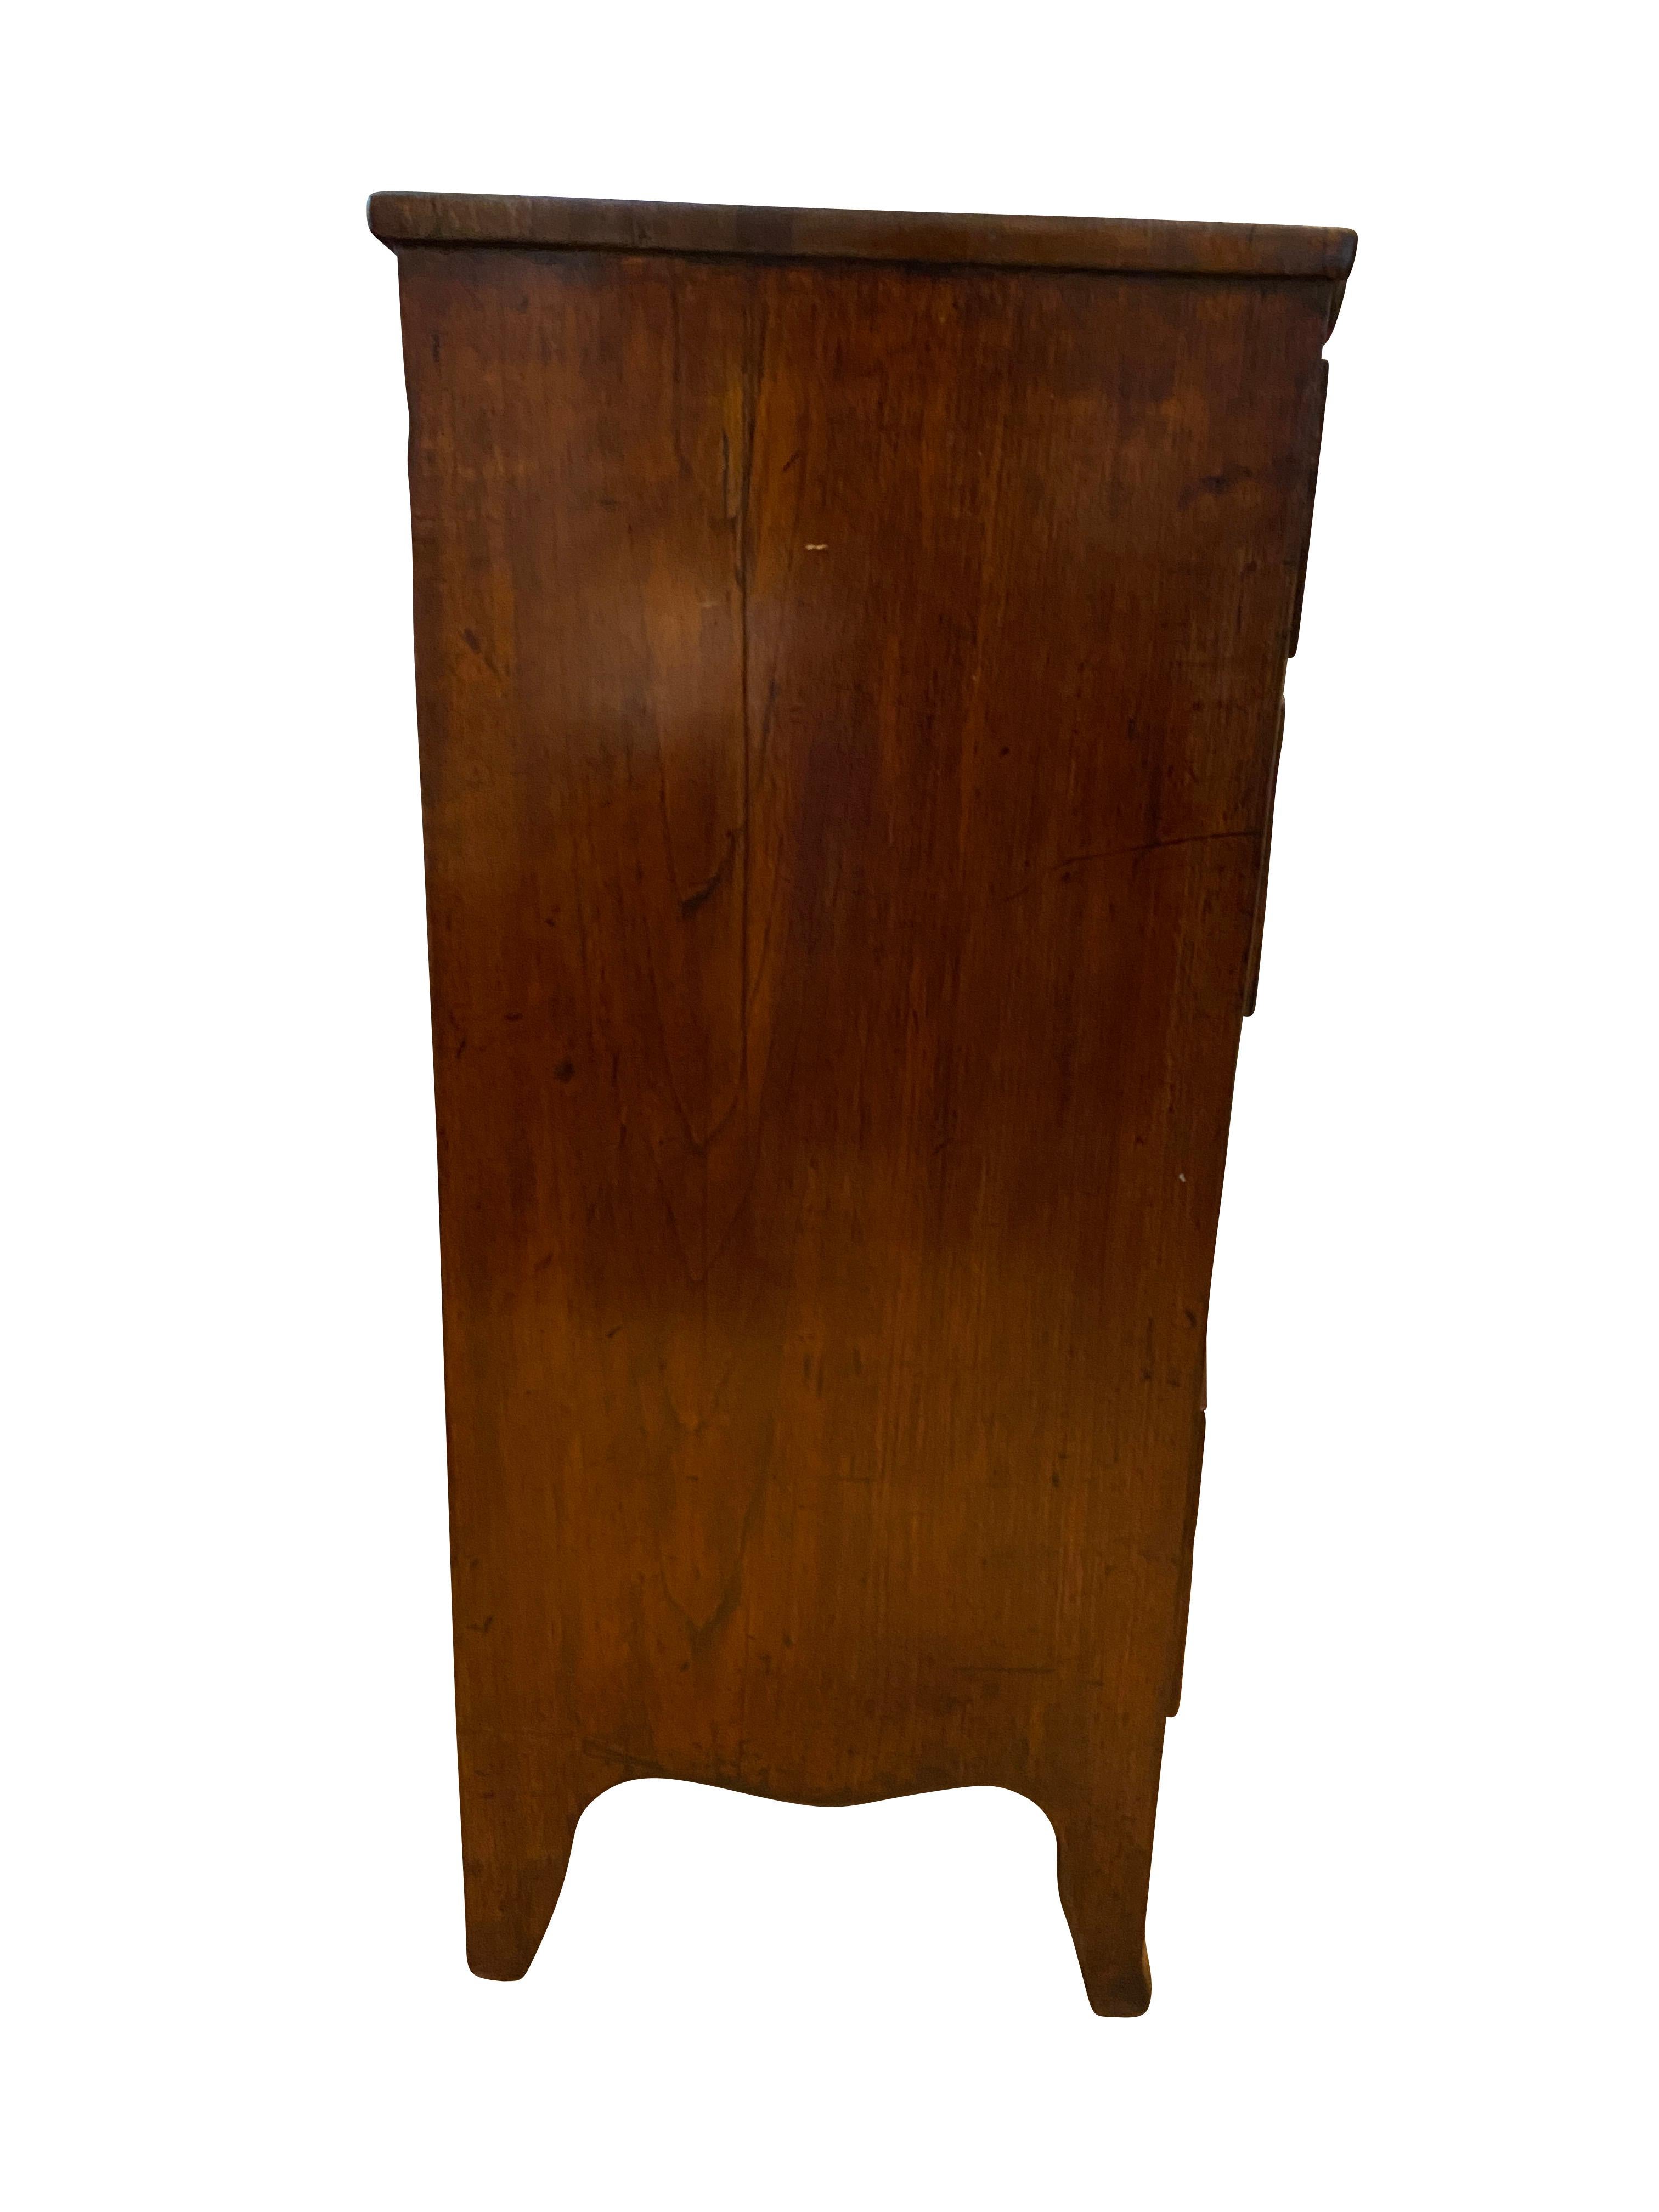 English George III Mahogany Bowfront Chest of Drawers